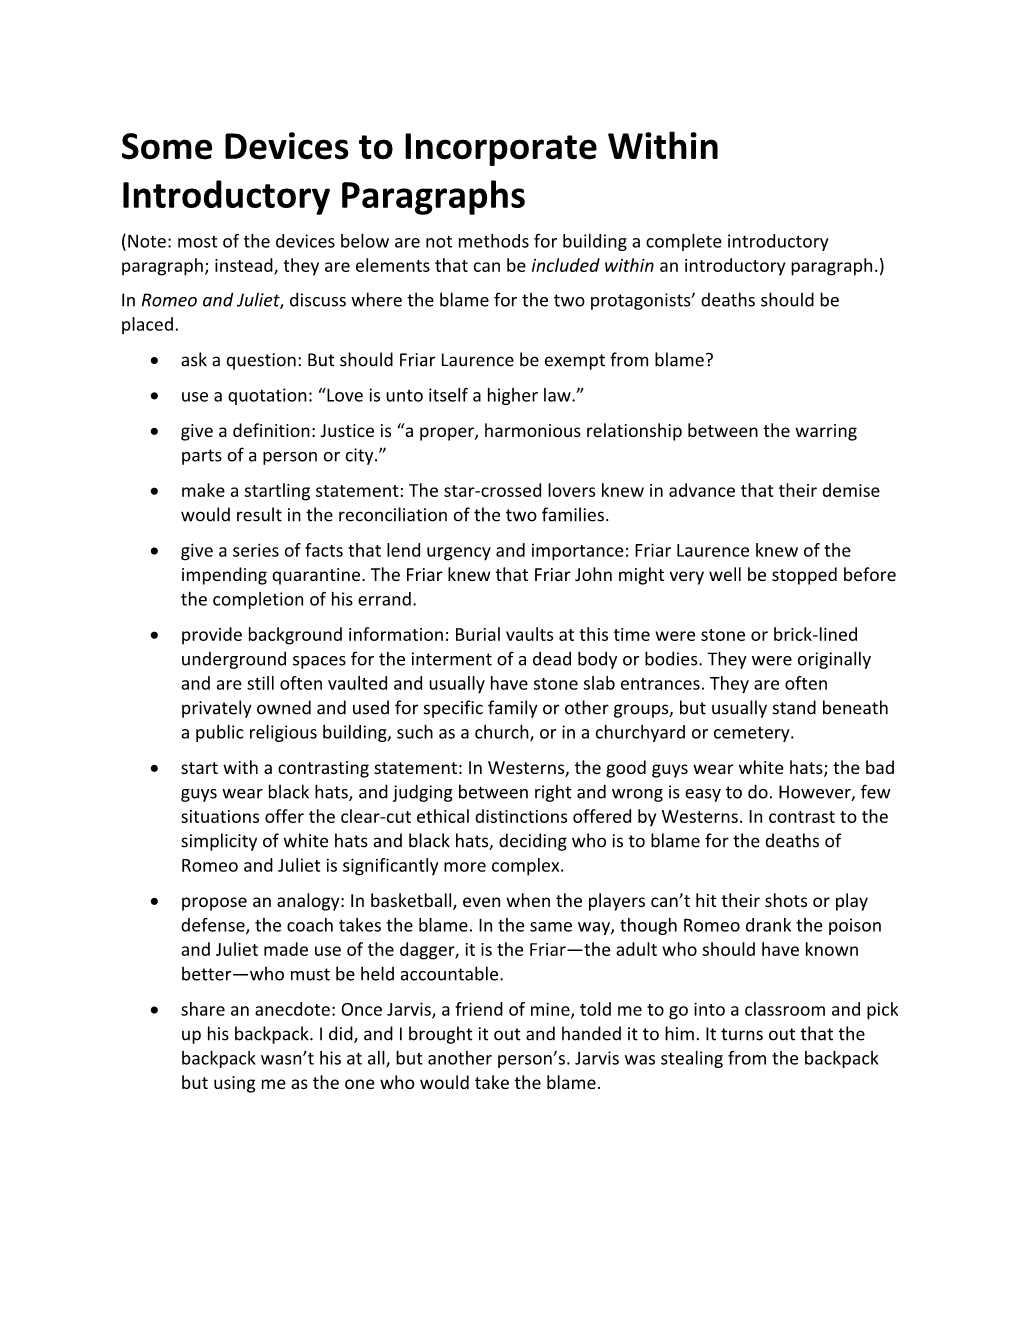 Some Devices to Incorporate Within Introductory Paragraphs